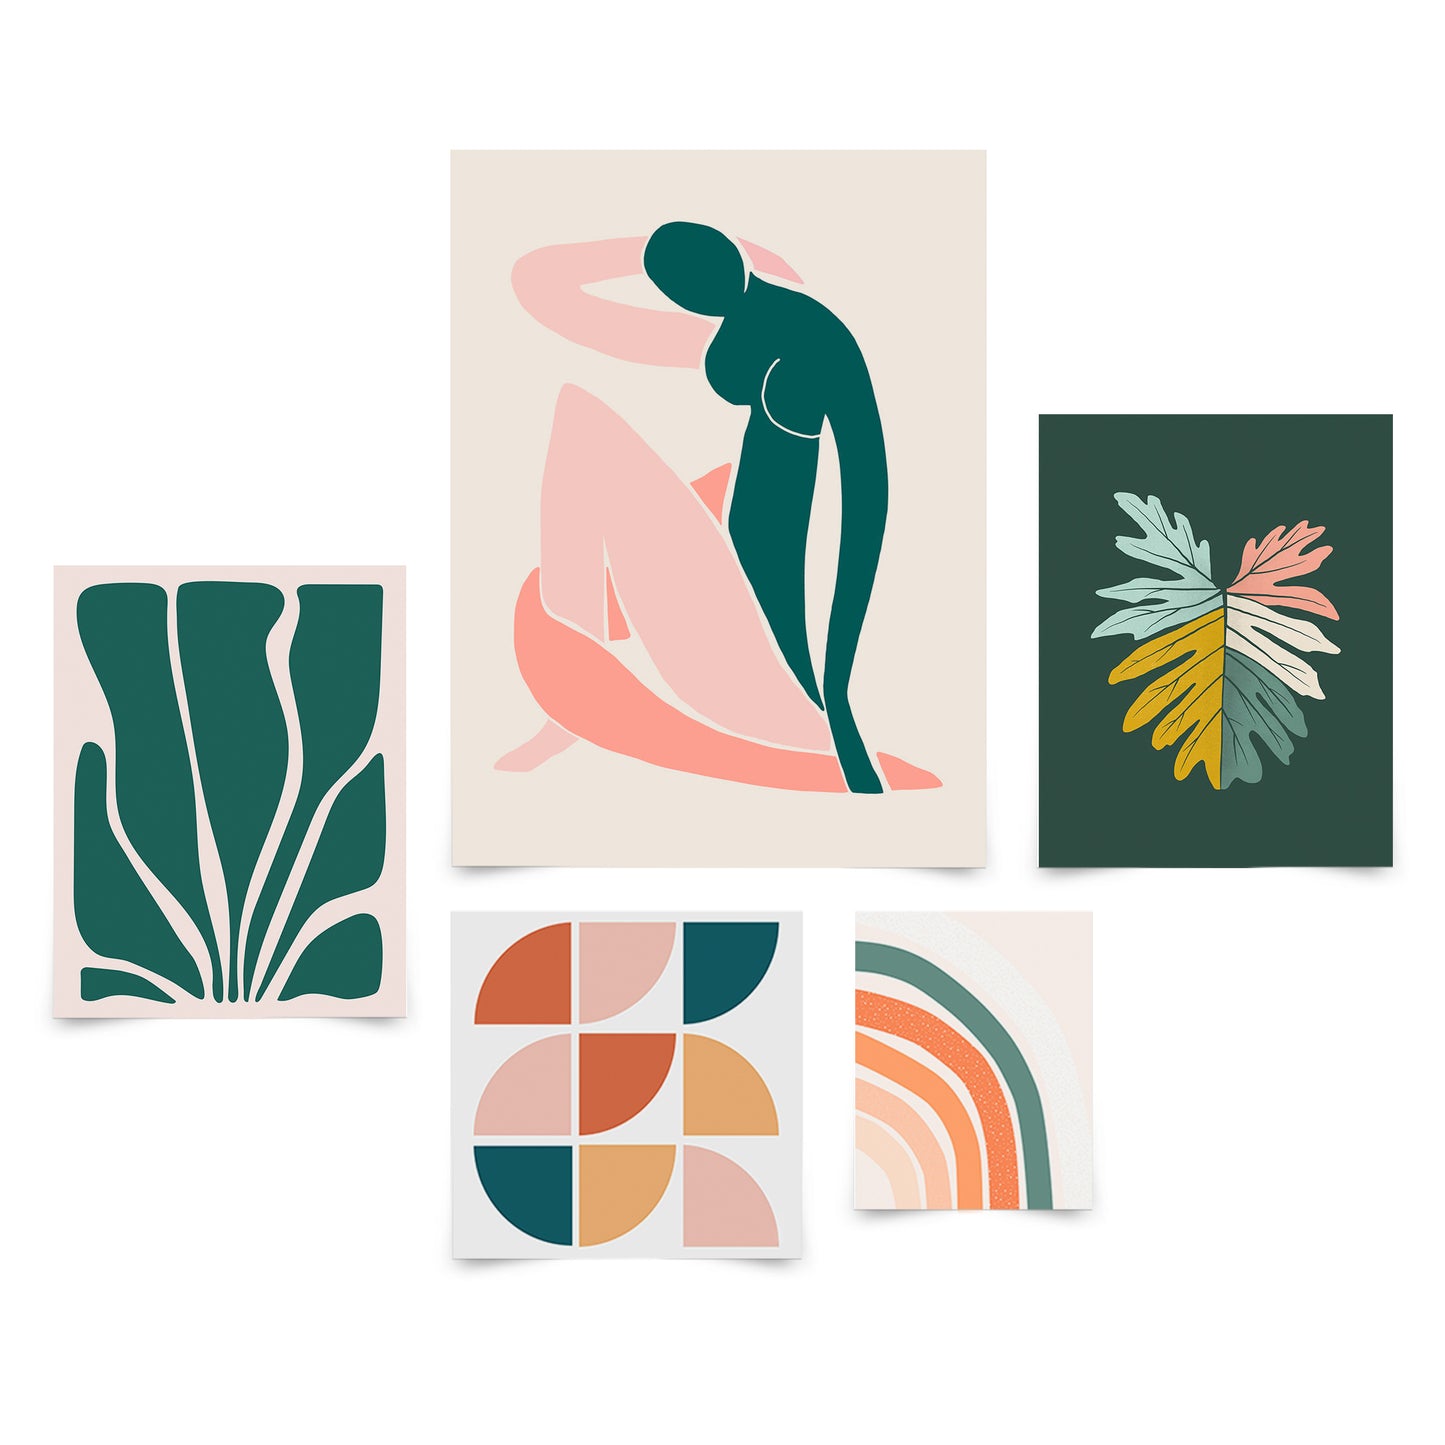 5 Piece Poster Gallery Wall Art Set - Pink & Green Abstract Woman Shapes - Print